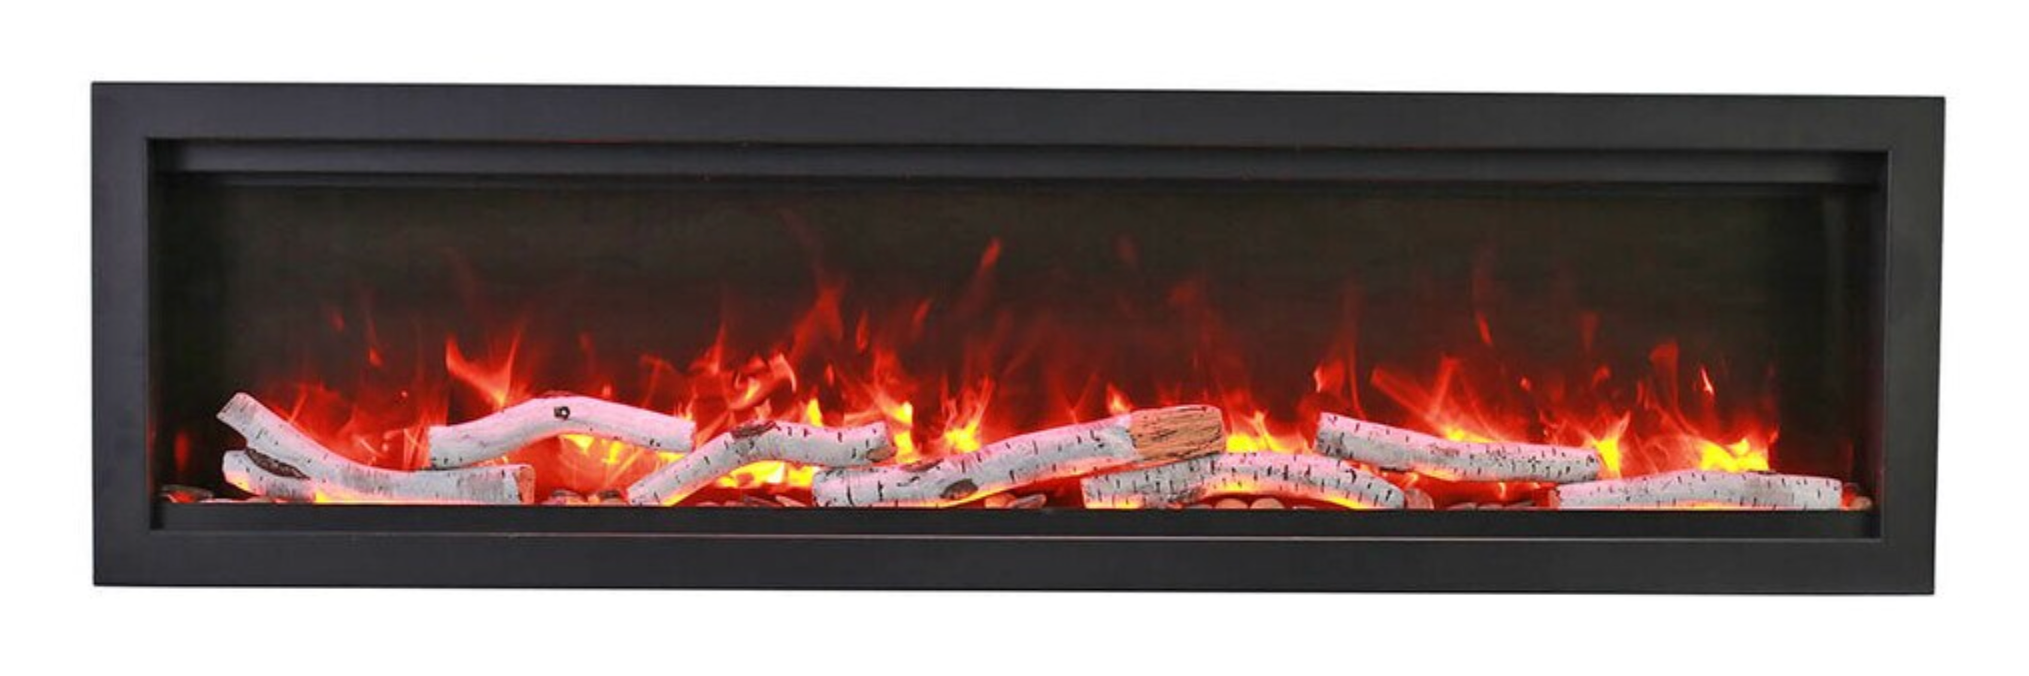 Remii WM Smart Built-In Electric Fireplace With Birch Media Set